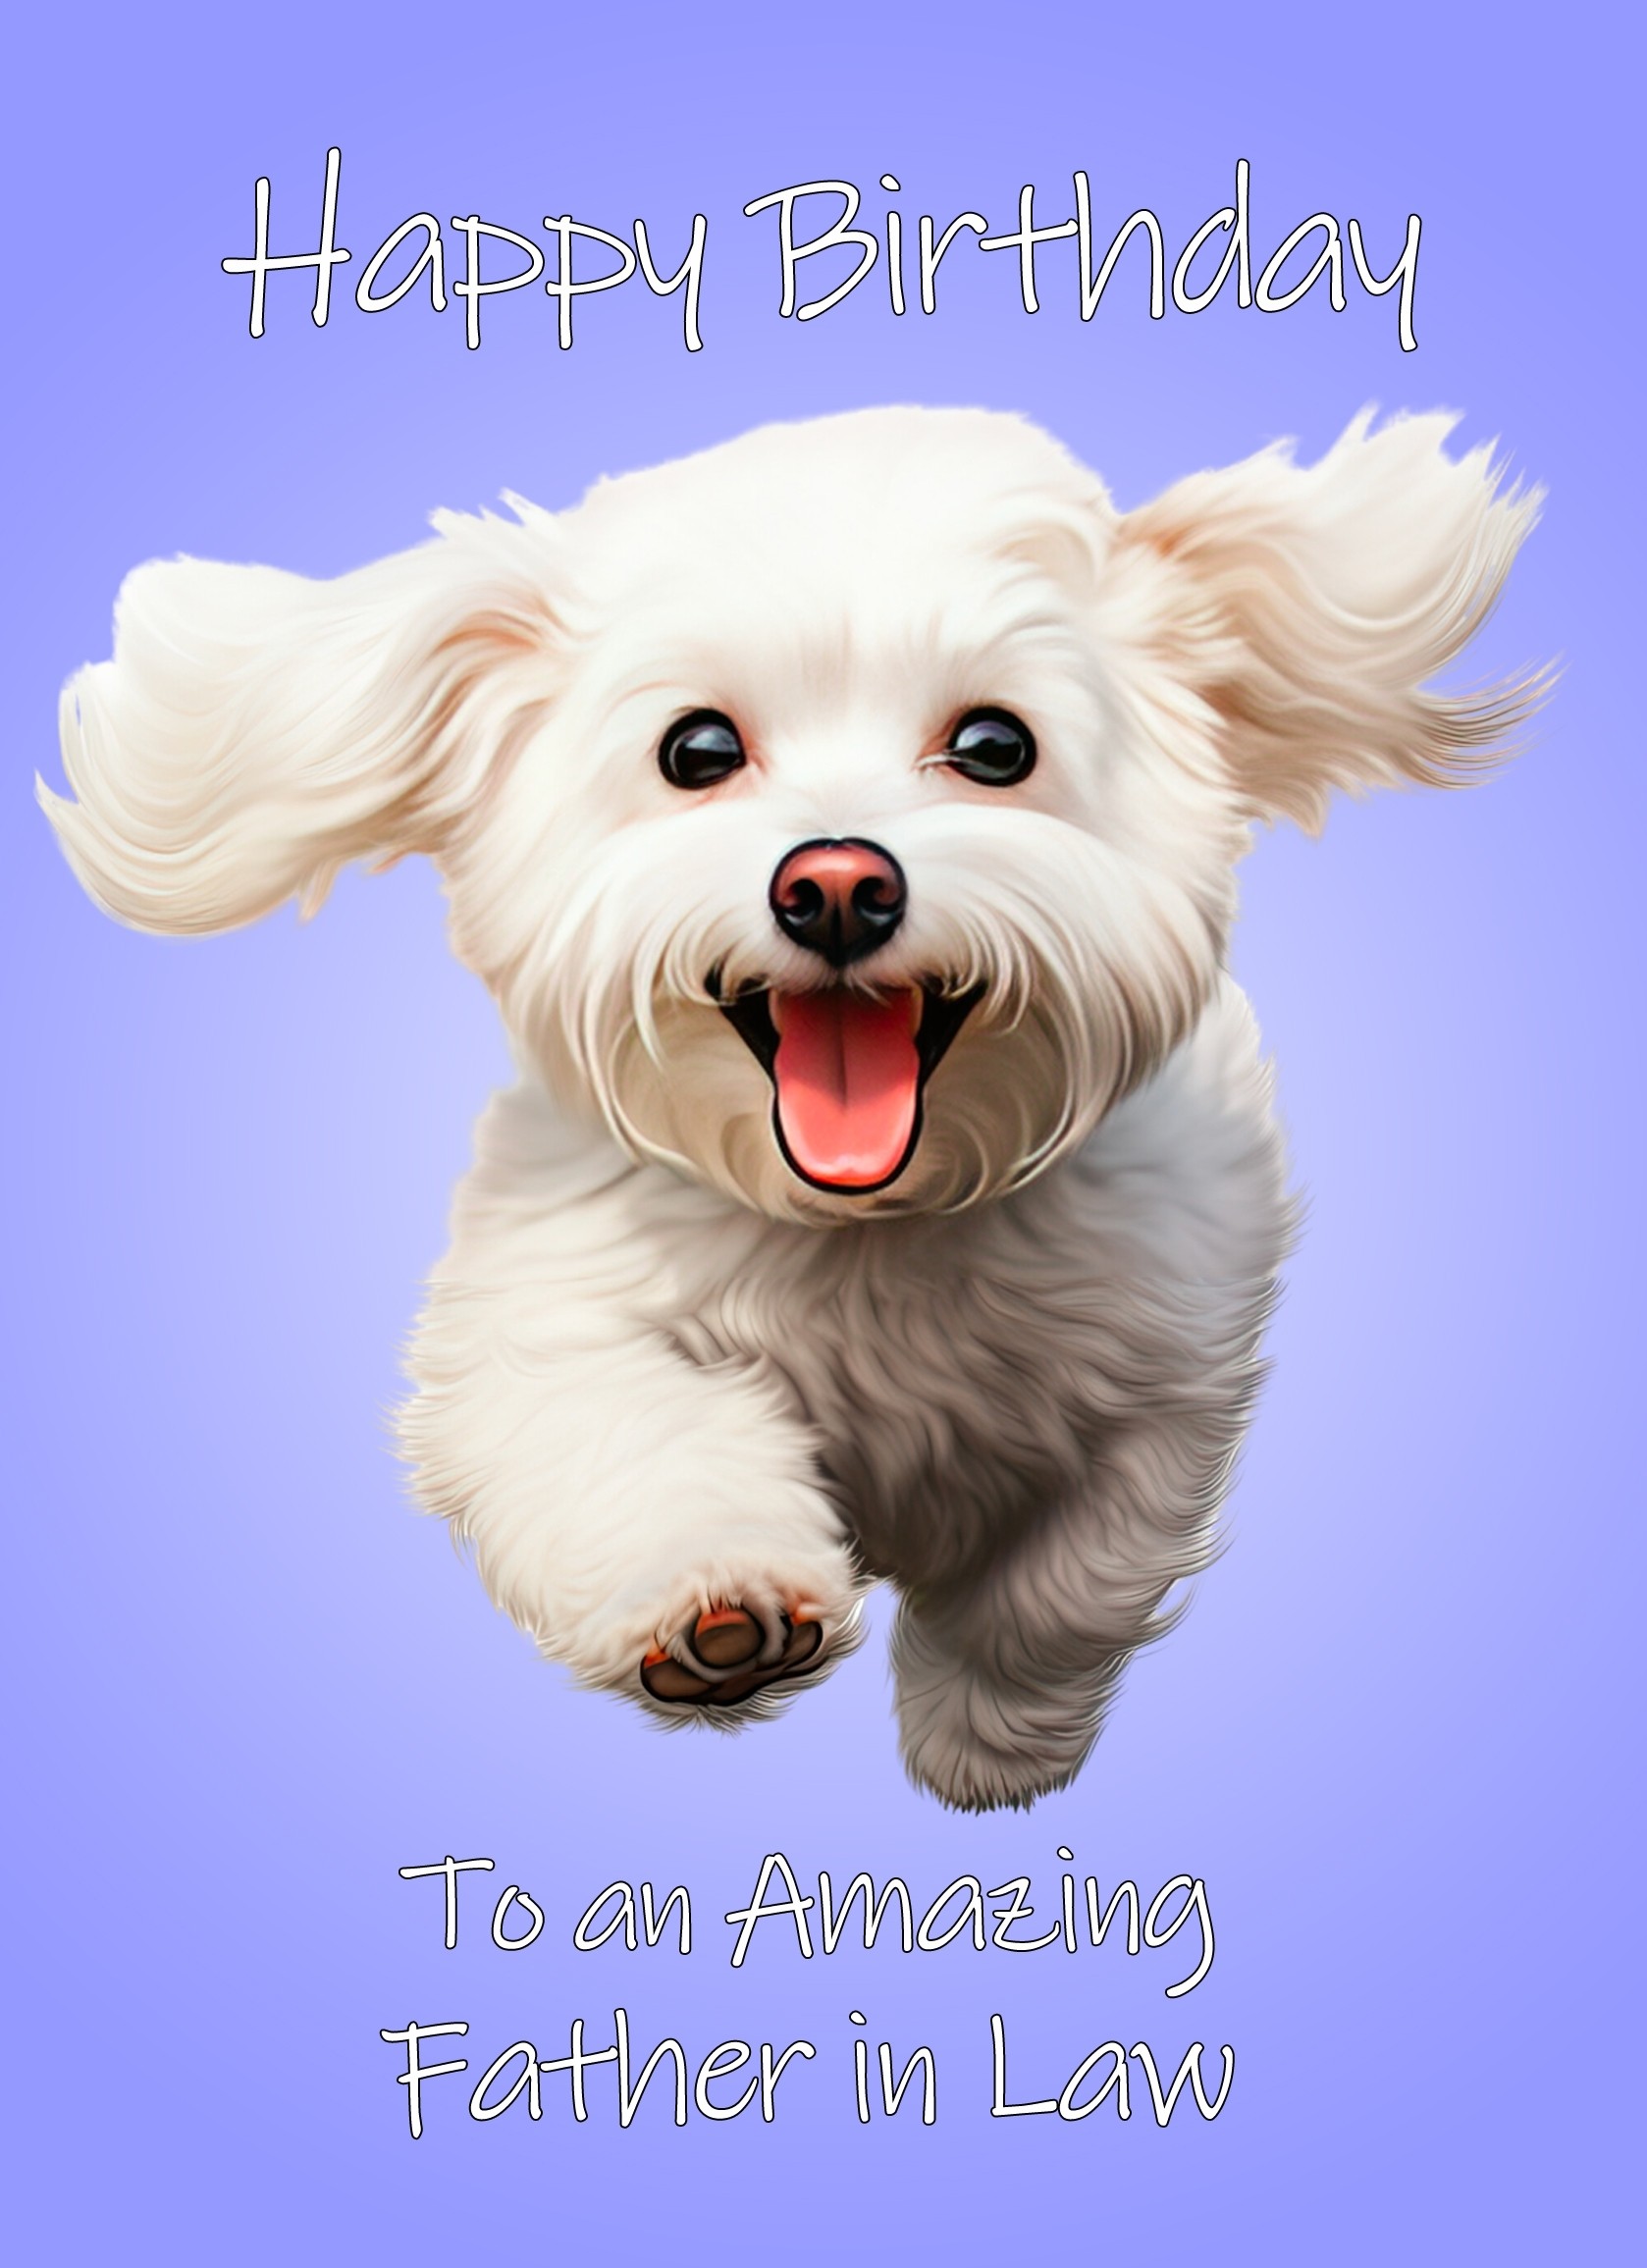 Bichon Frise Dog Birthday Card For Father in Law